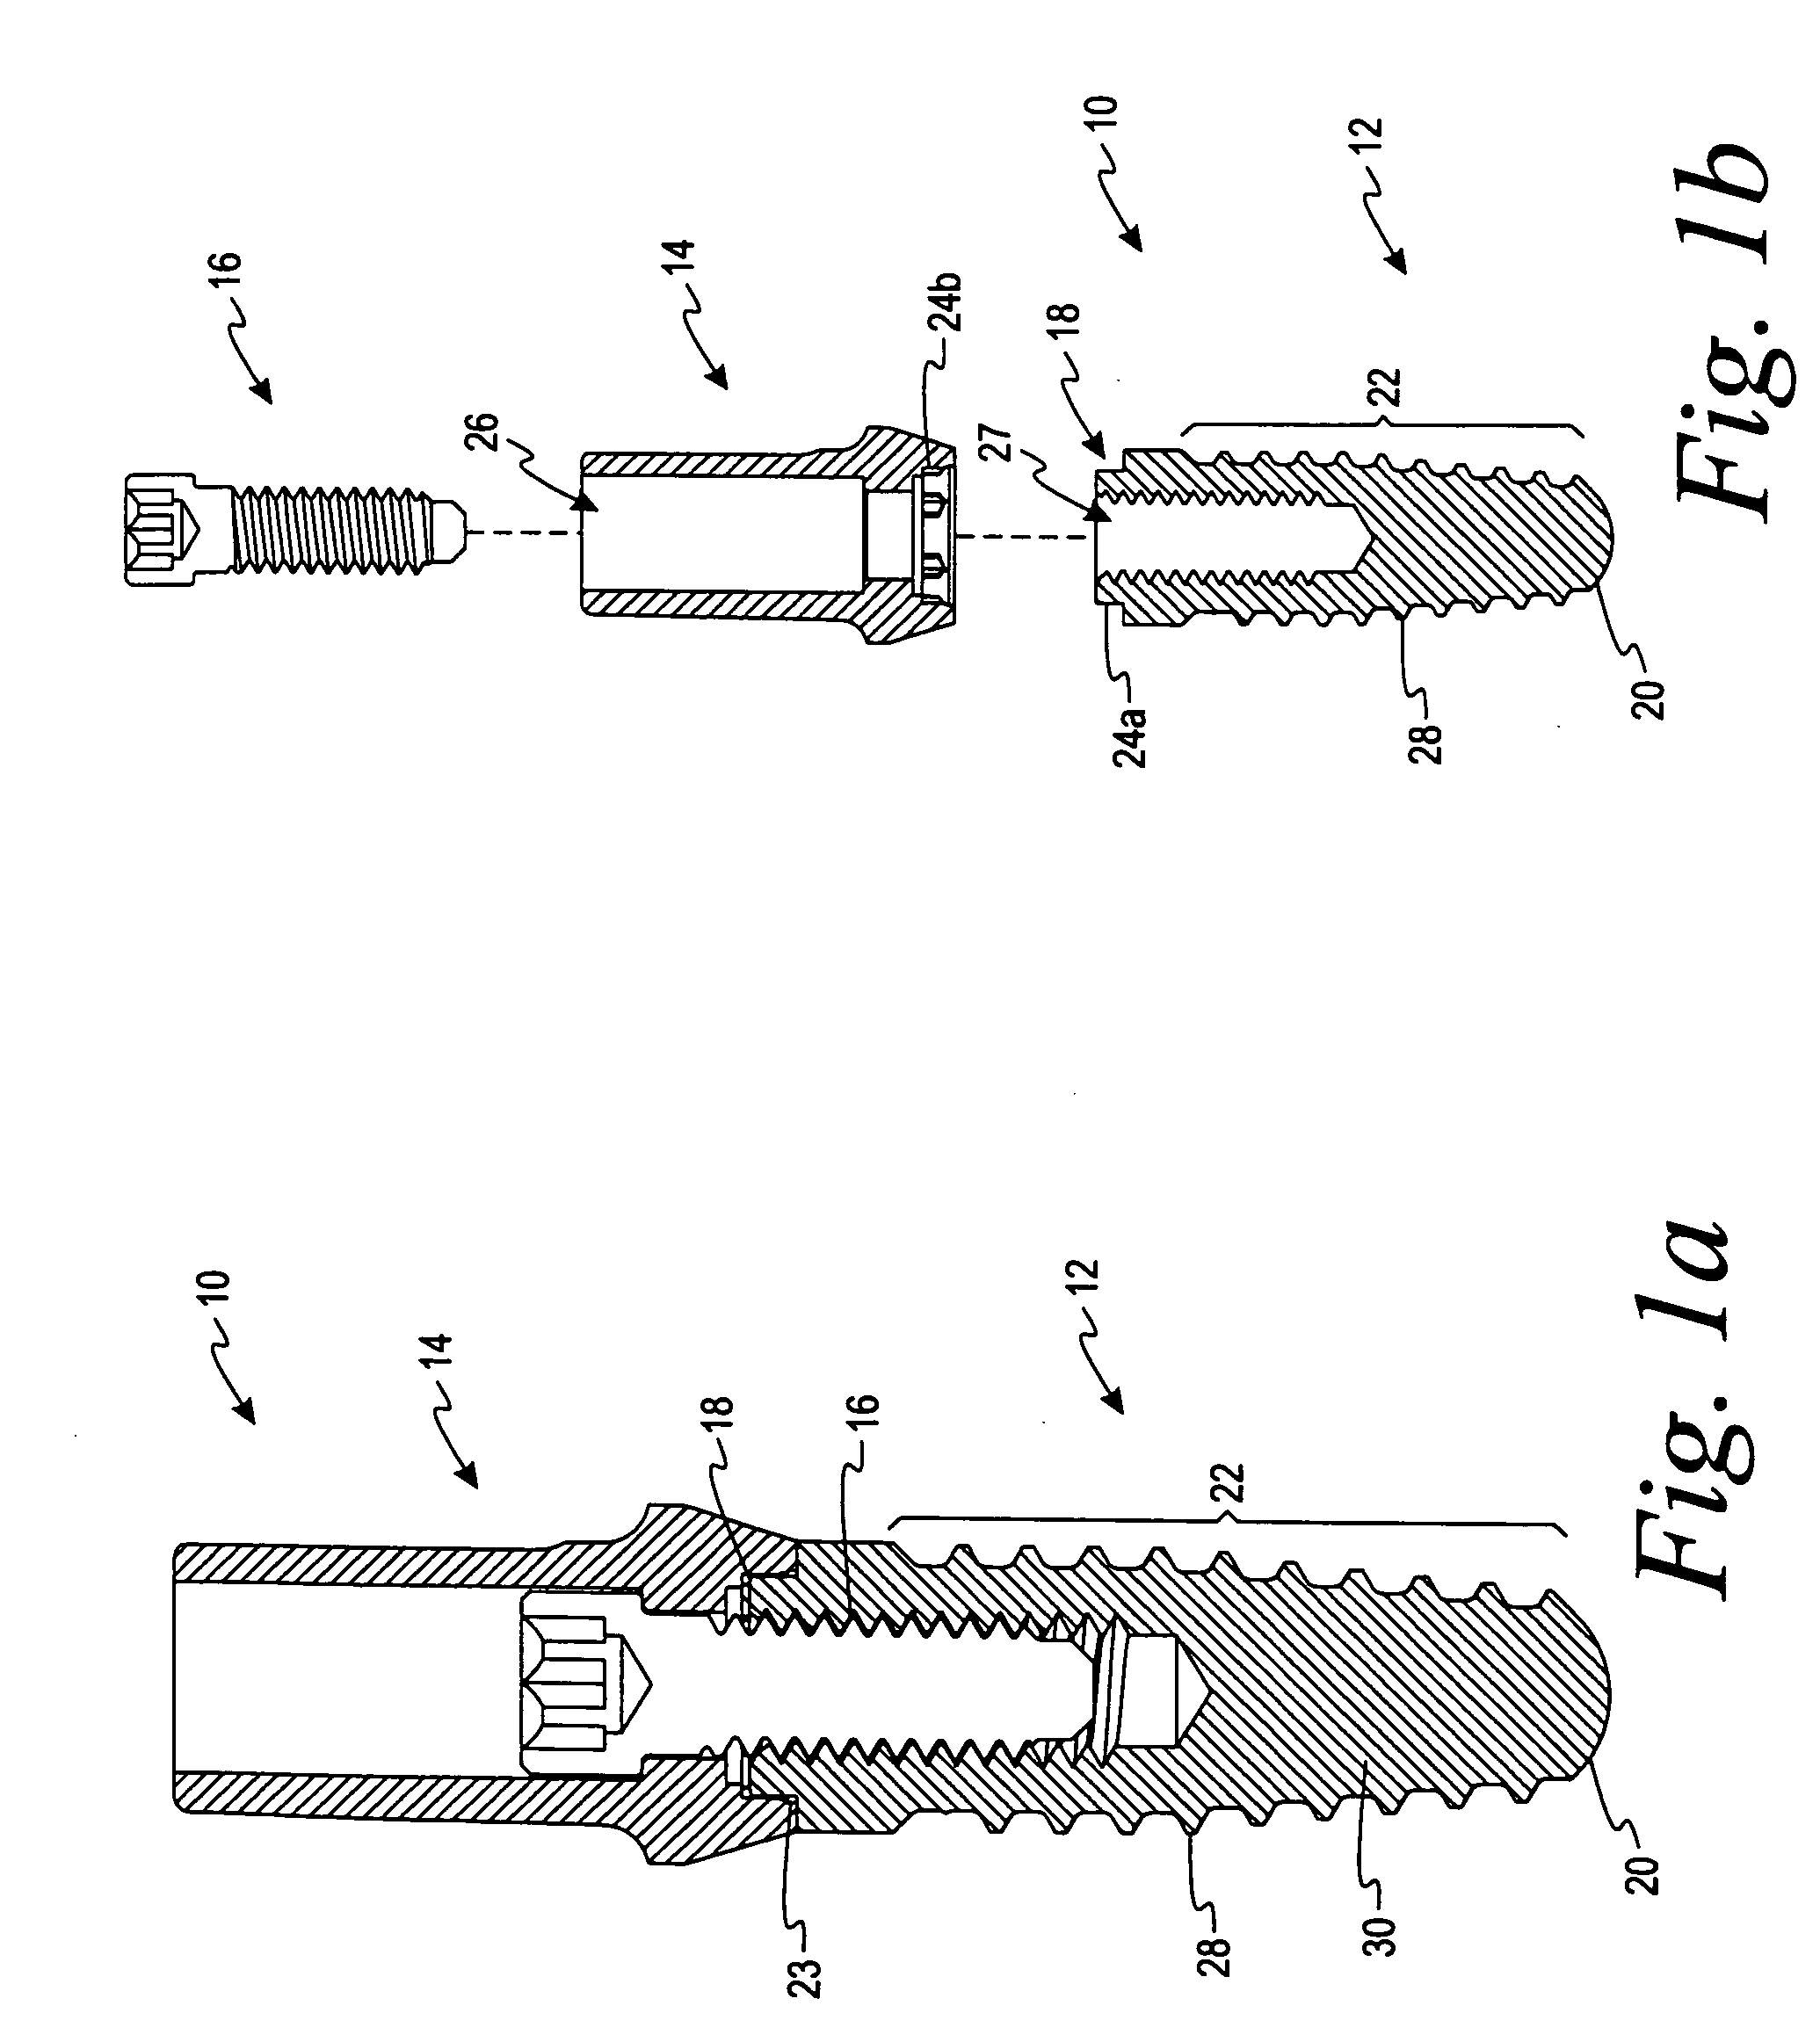 Deposition of silver particles on an implant surface